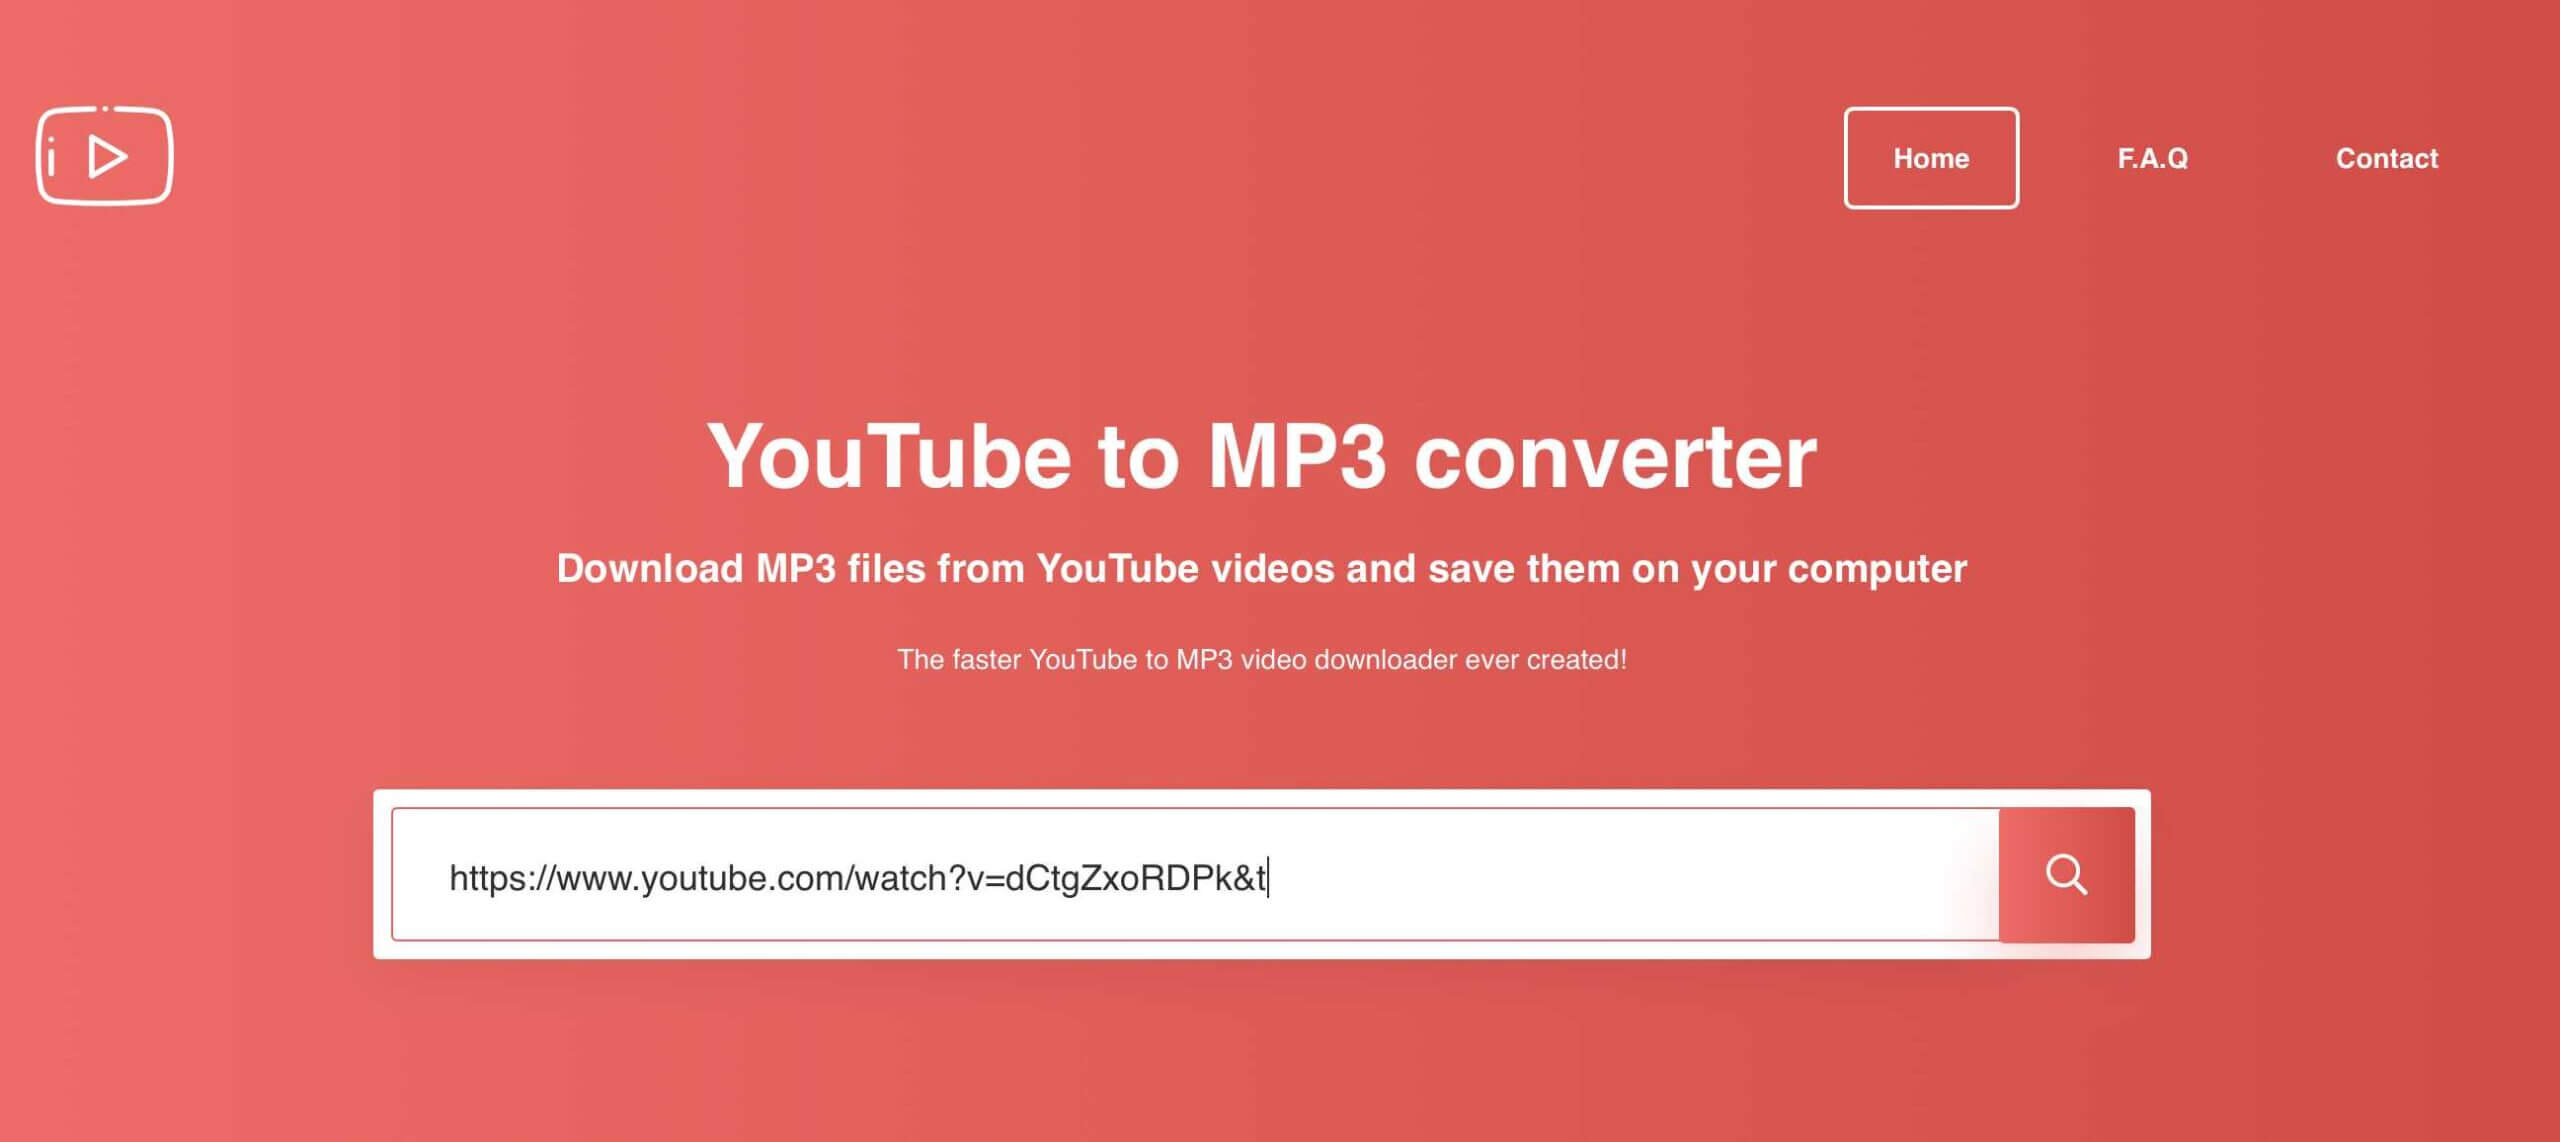 Mp3 youtube YouTube to